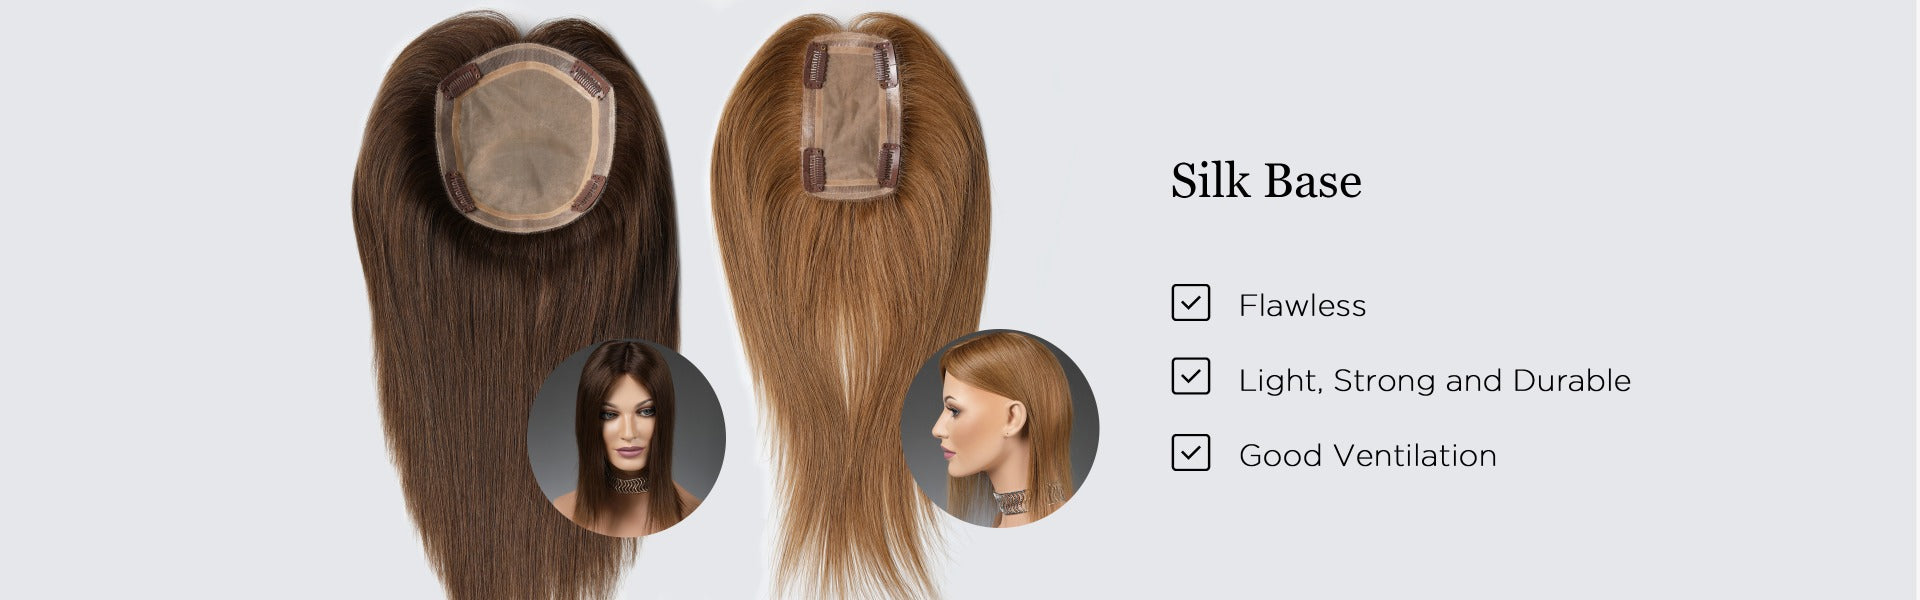 Buy Ultra Deluxe Silk Base Toppers For Women (Low Cost) | LilyHair®